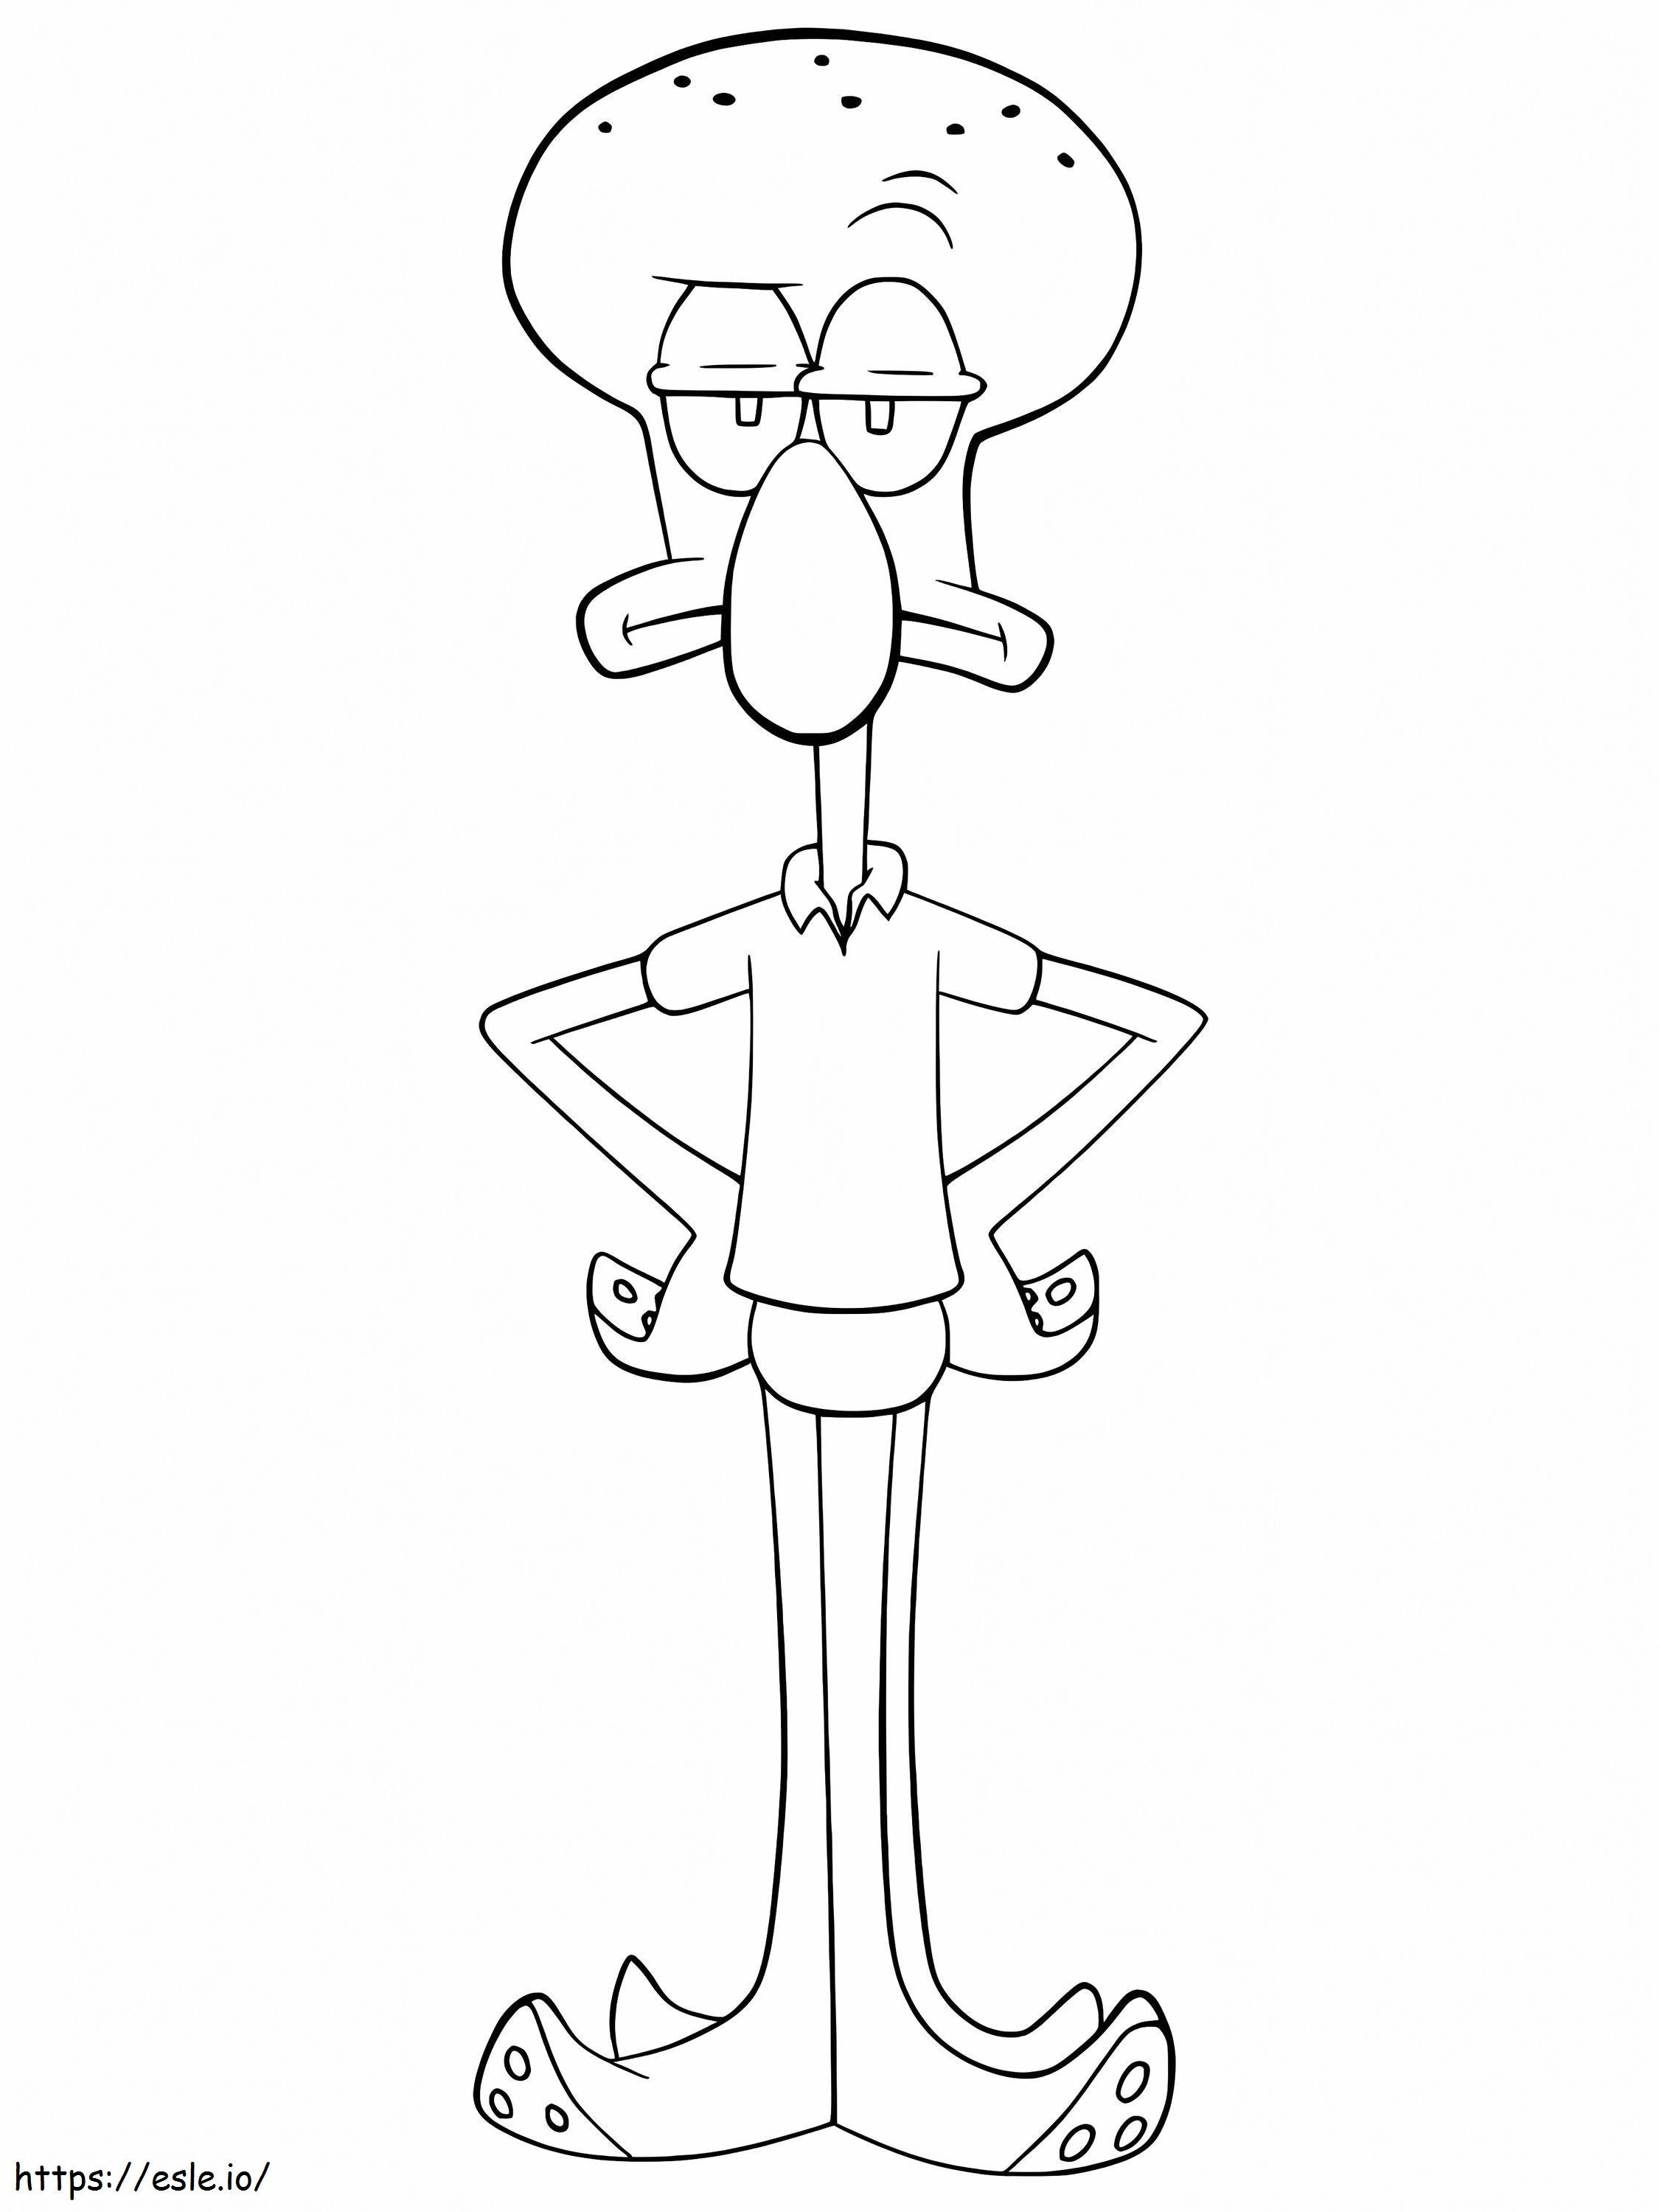 Squidward funny coloring page